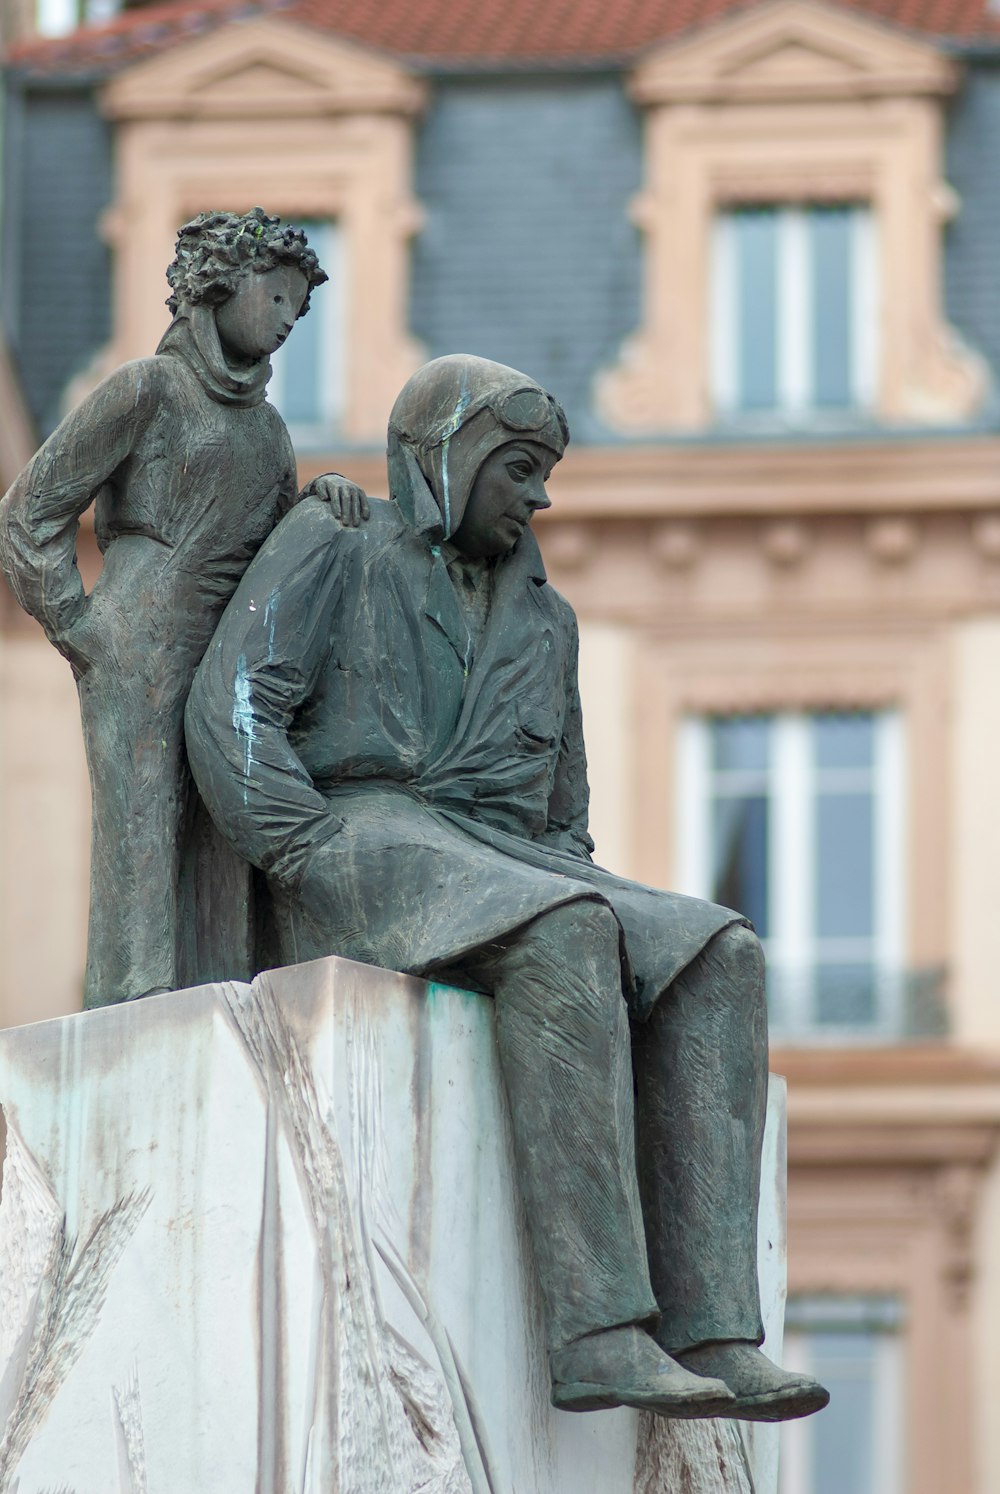 a statue of a man sitting next to another man